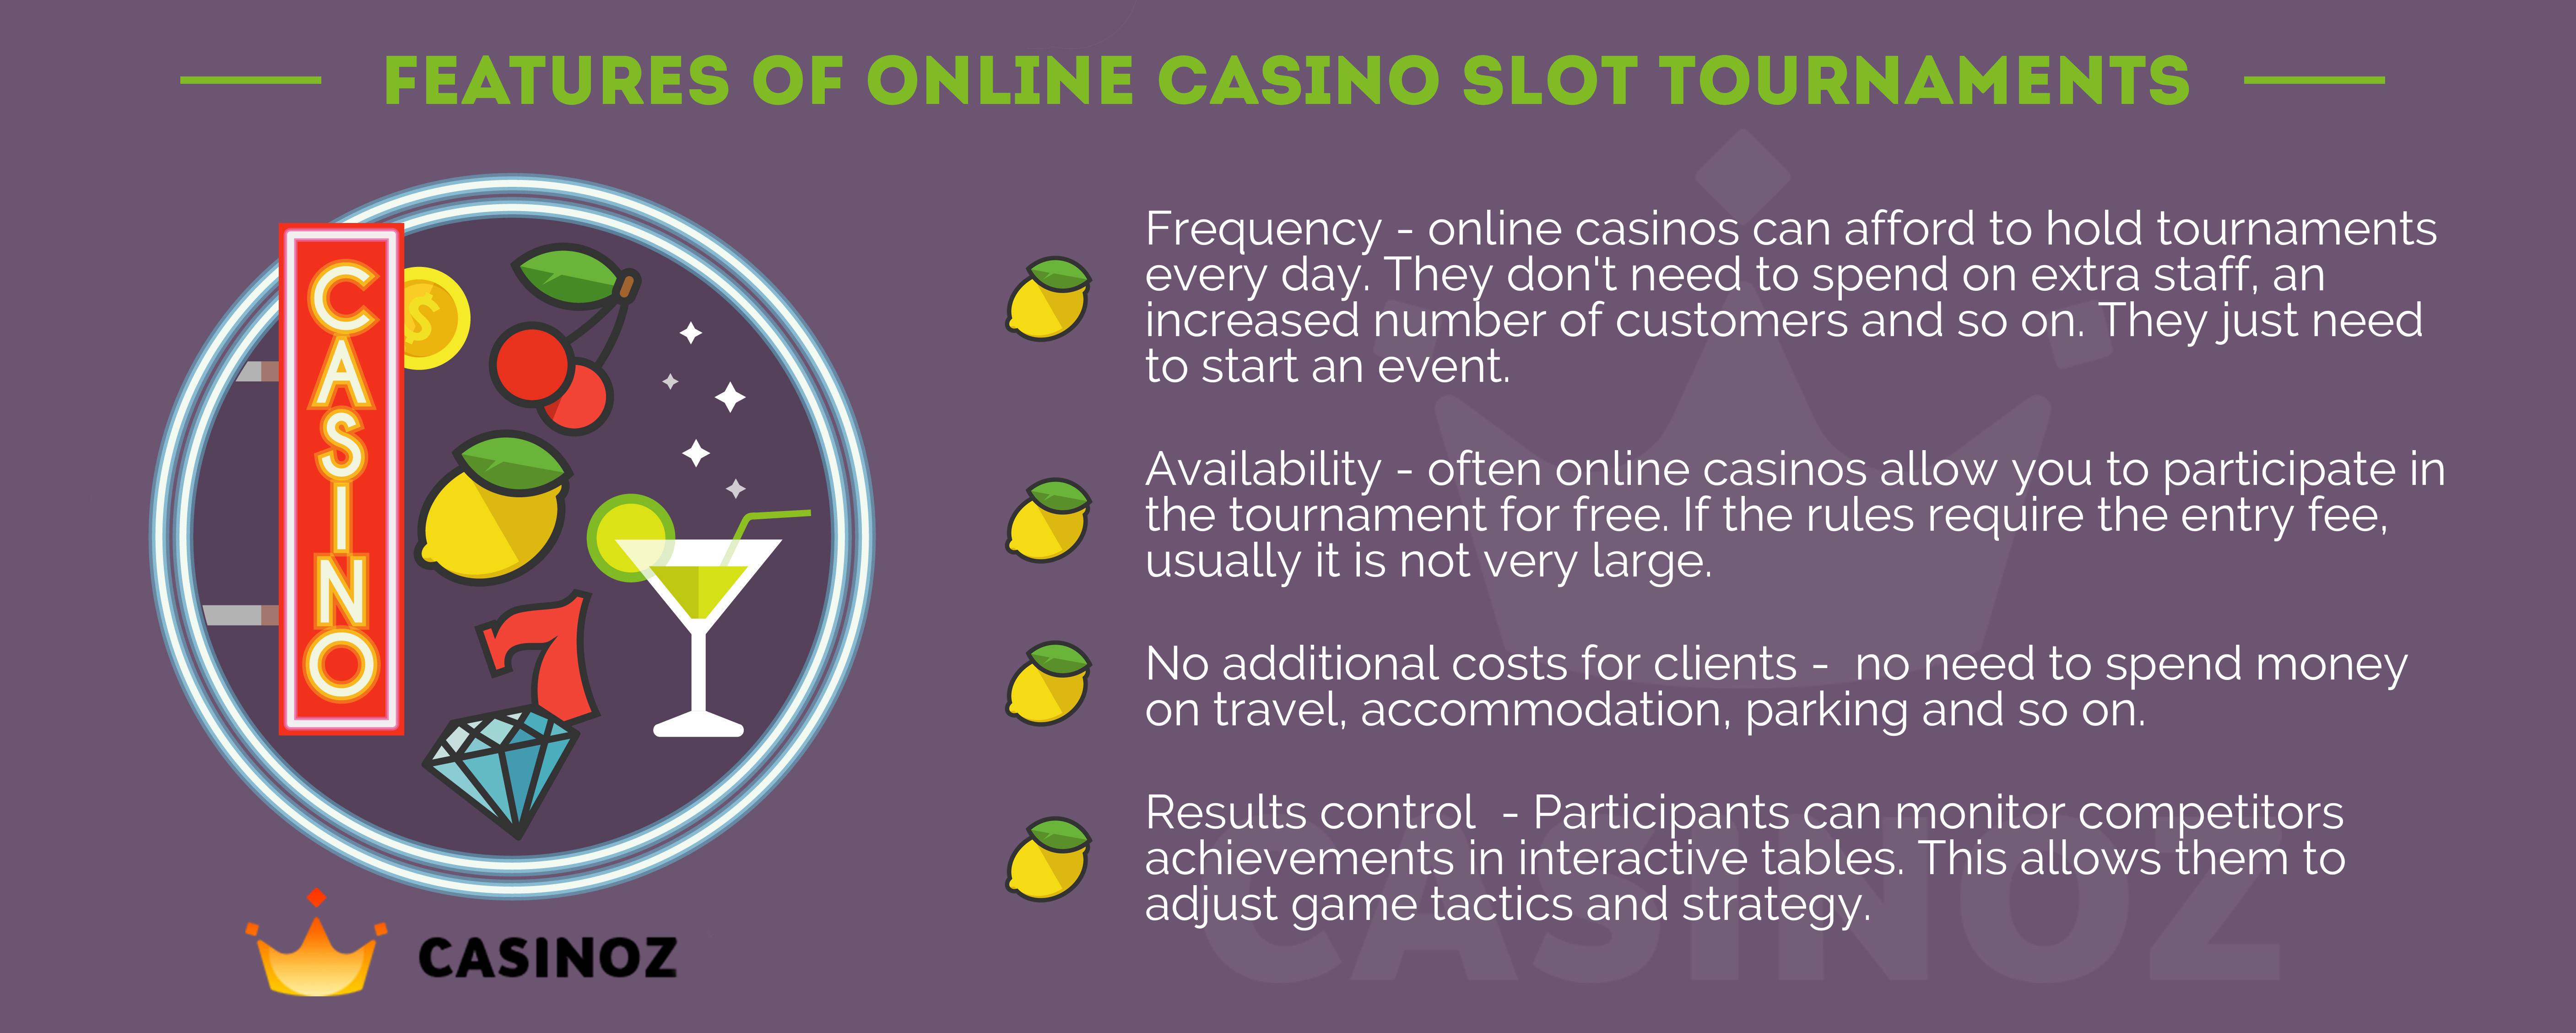 Online casinos with slot tournaments